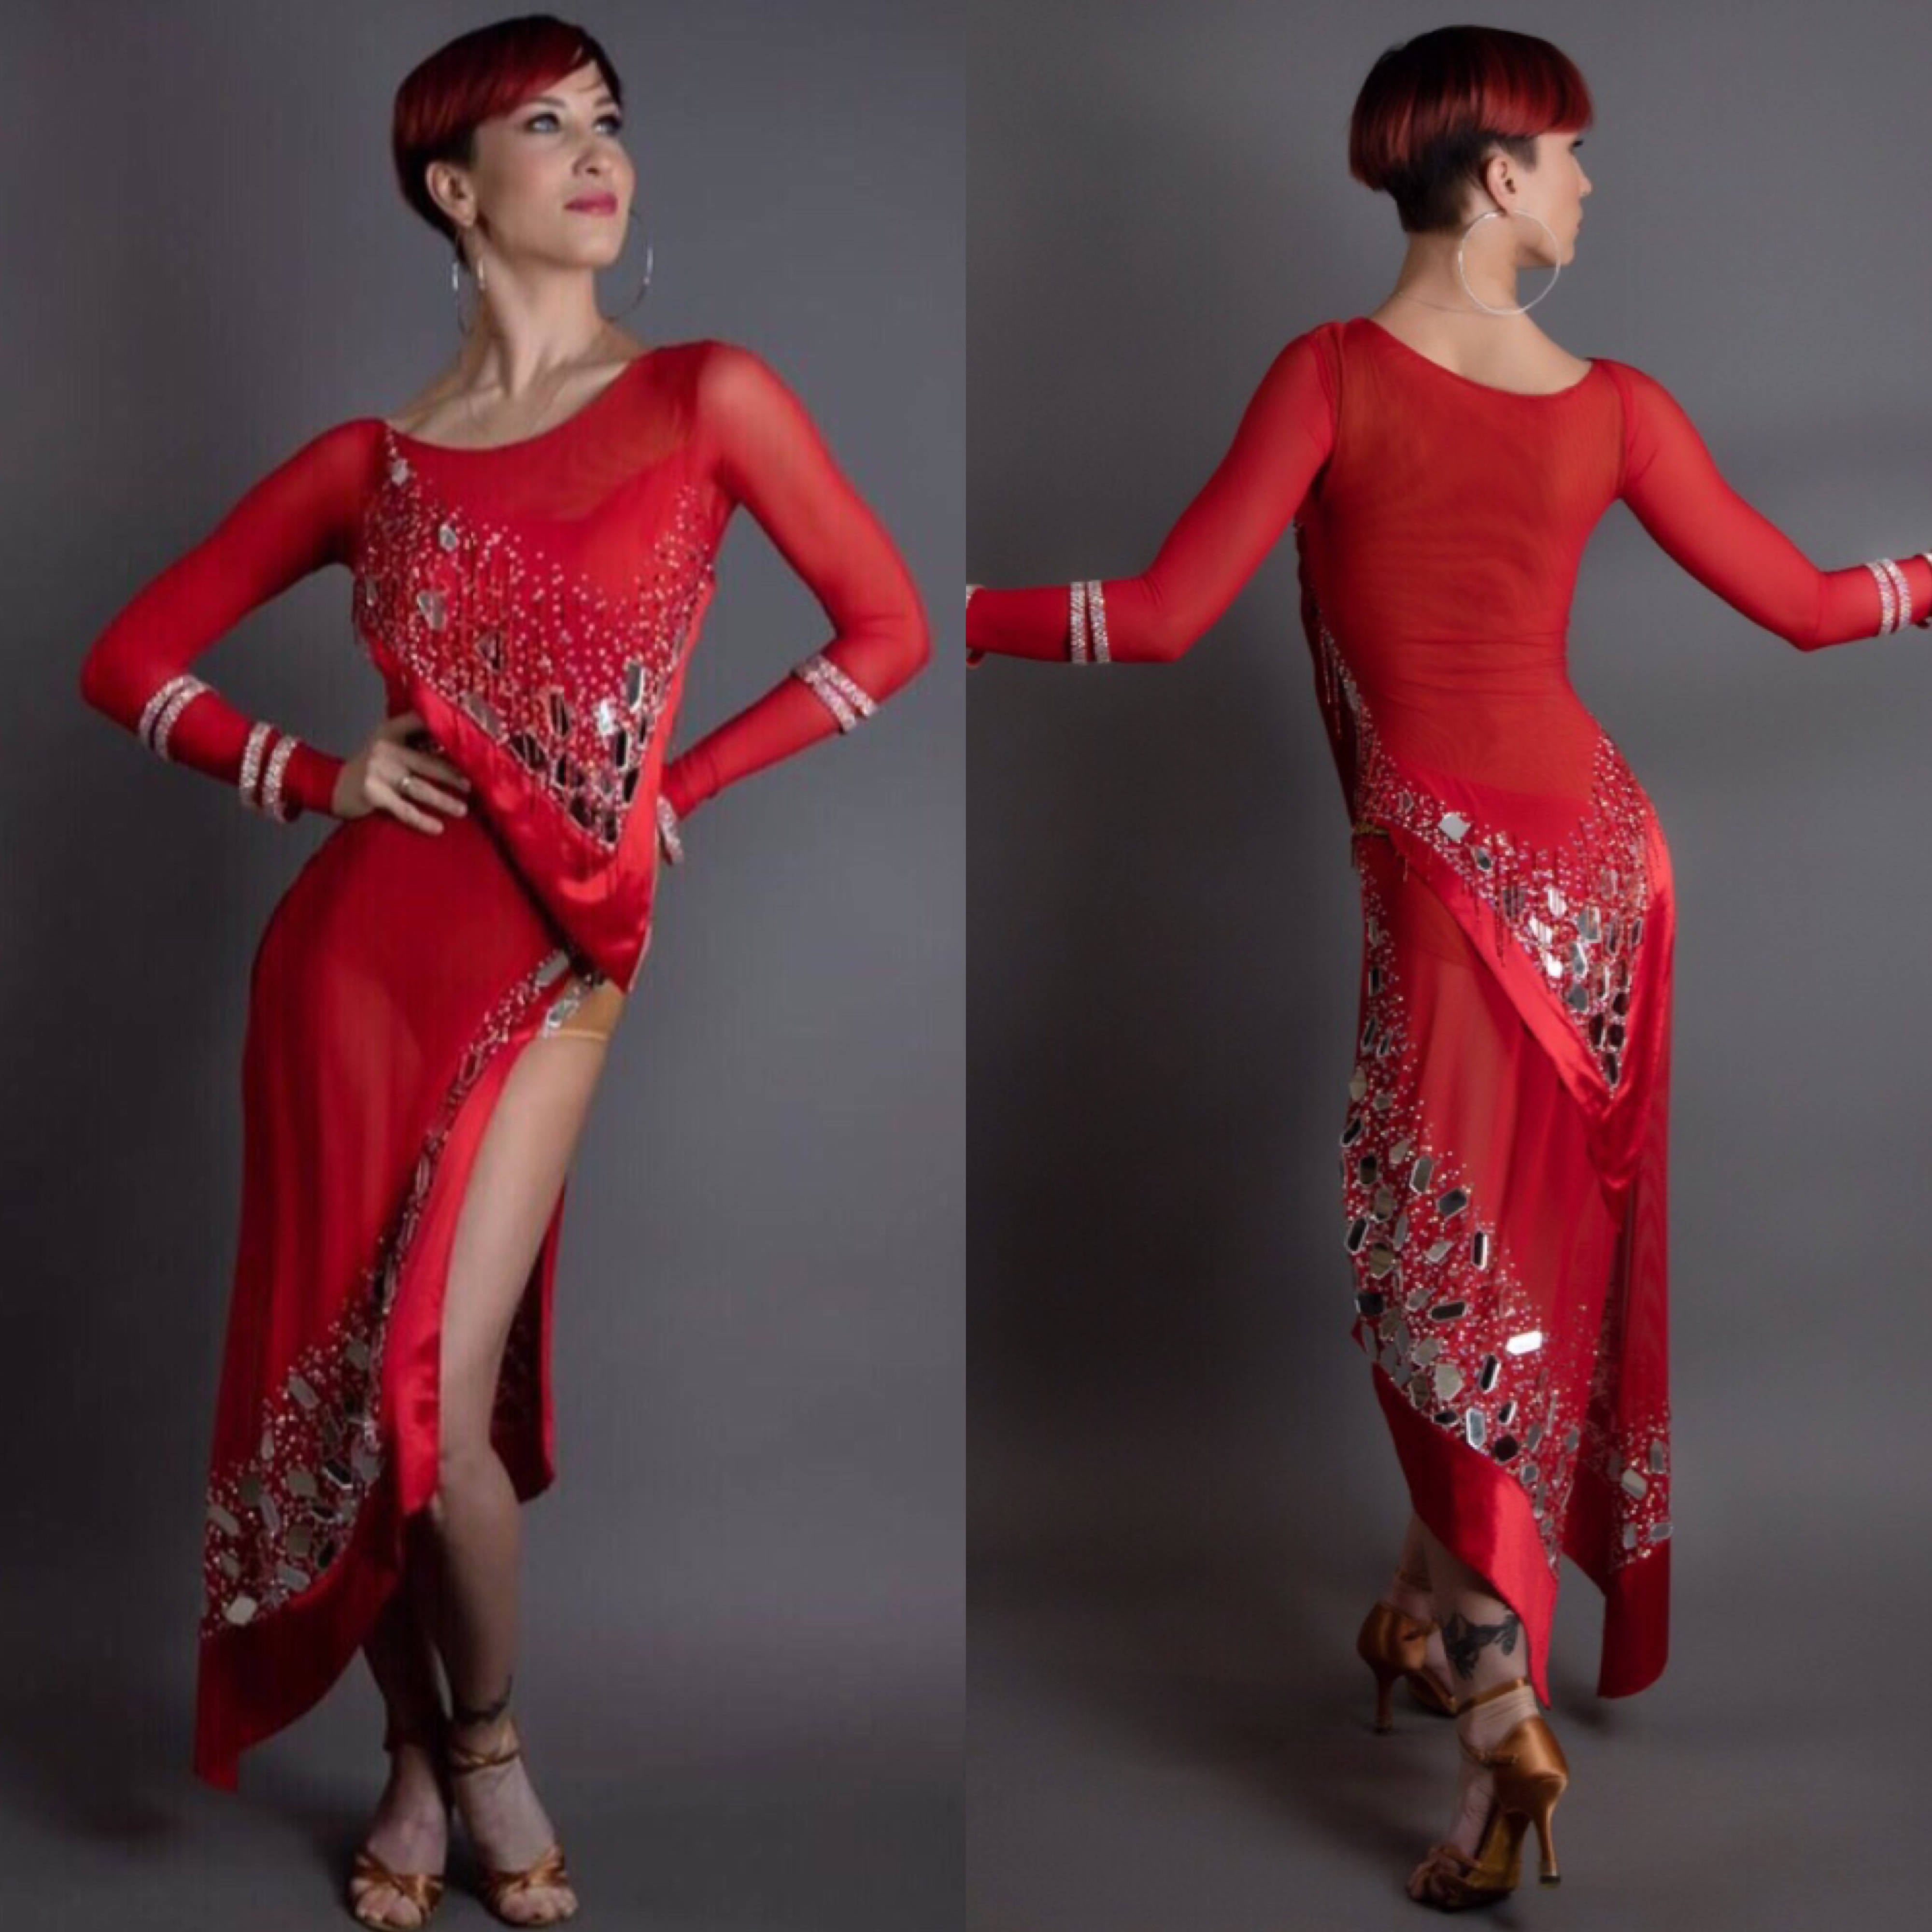 Red Latin Dress by Art-Master For Sale (ballroom dresses for sale, latin dresses for sale, dancesport dresses for sale, rhythm dresses for sale)